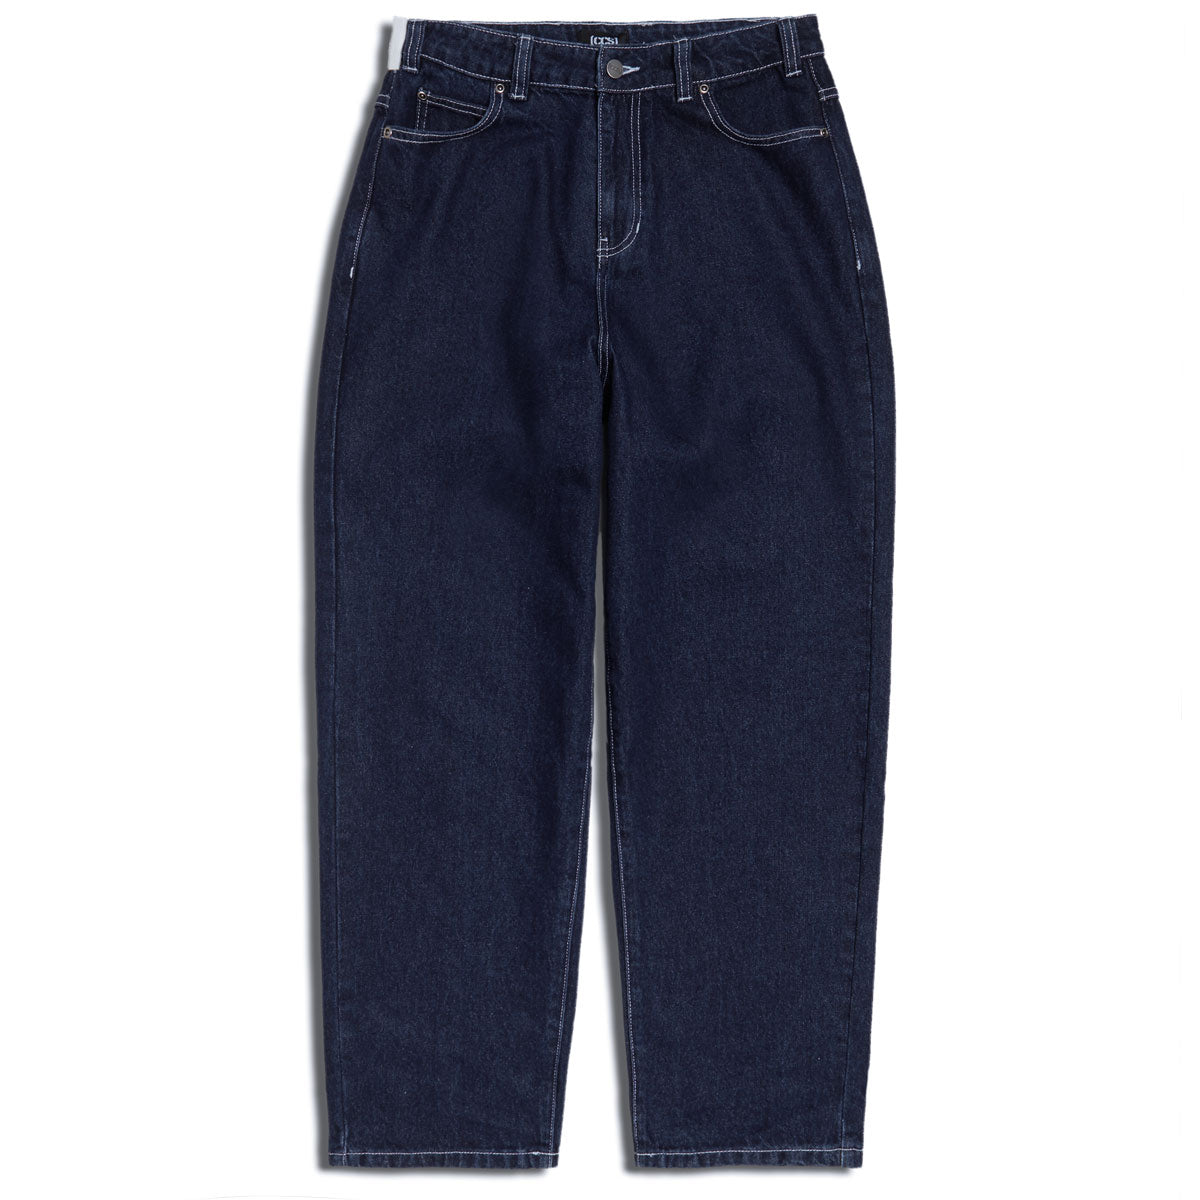 CCS Baggy Taper Denim Jeans - Overdyed Navy image 4